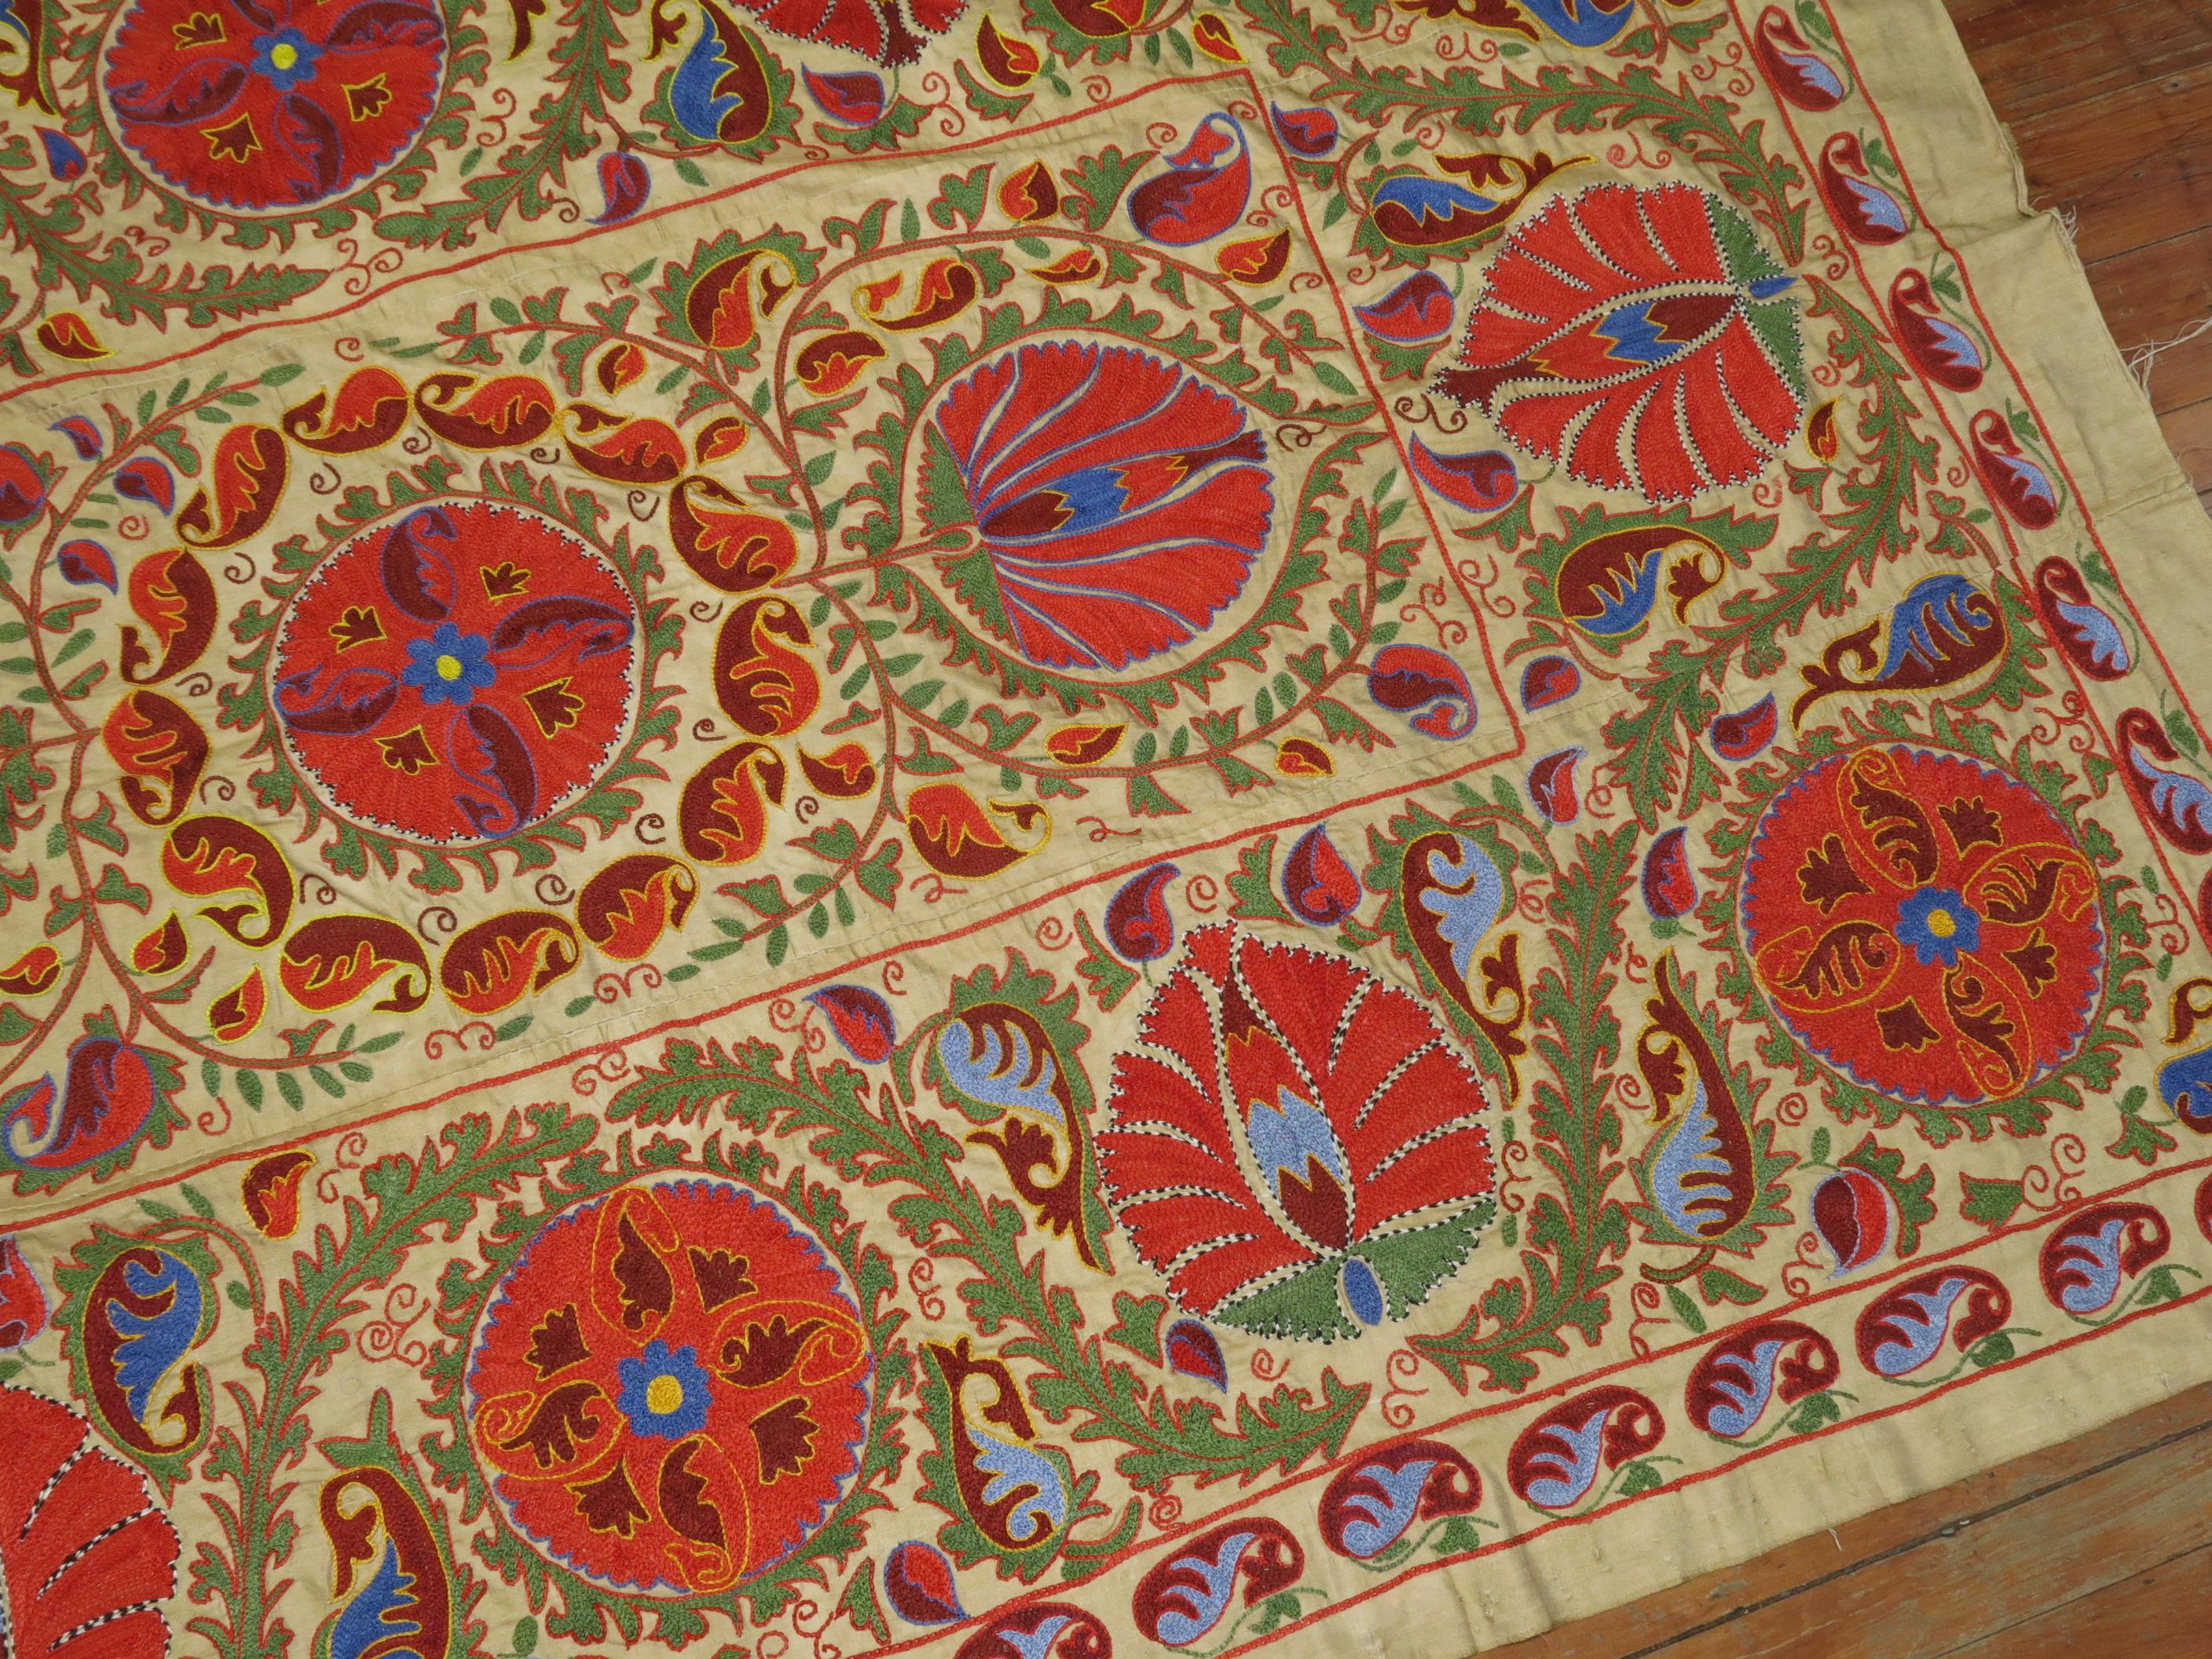 One of a kind colorful hand embroidered Suzanni textile. Measures: 58” x 86”.